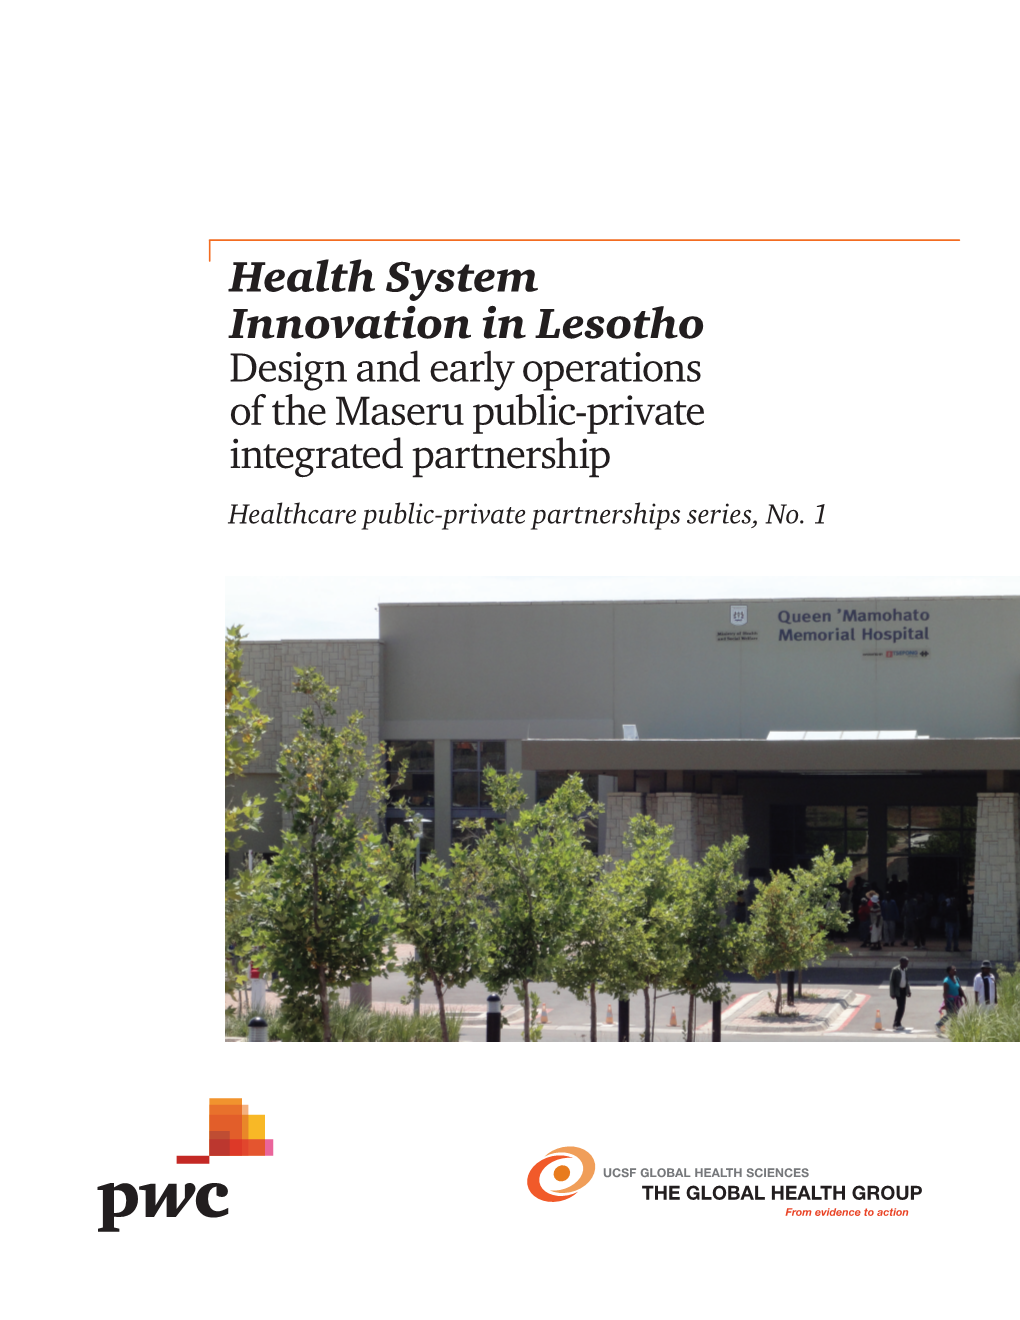 Health System Innovation in Lesotho: Design and Early Operations of the Maseru Public- Private Integrated Partnership